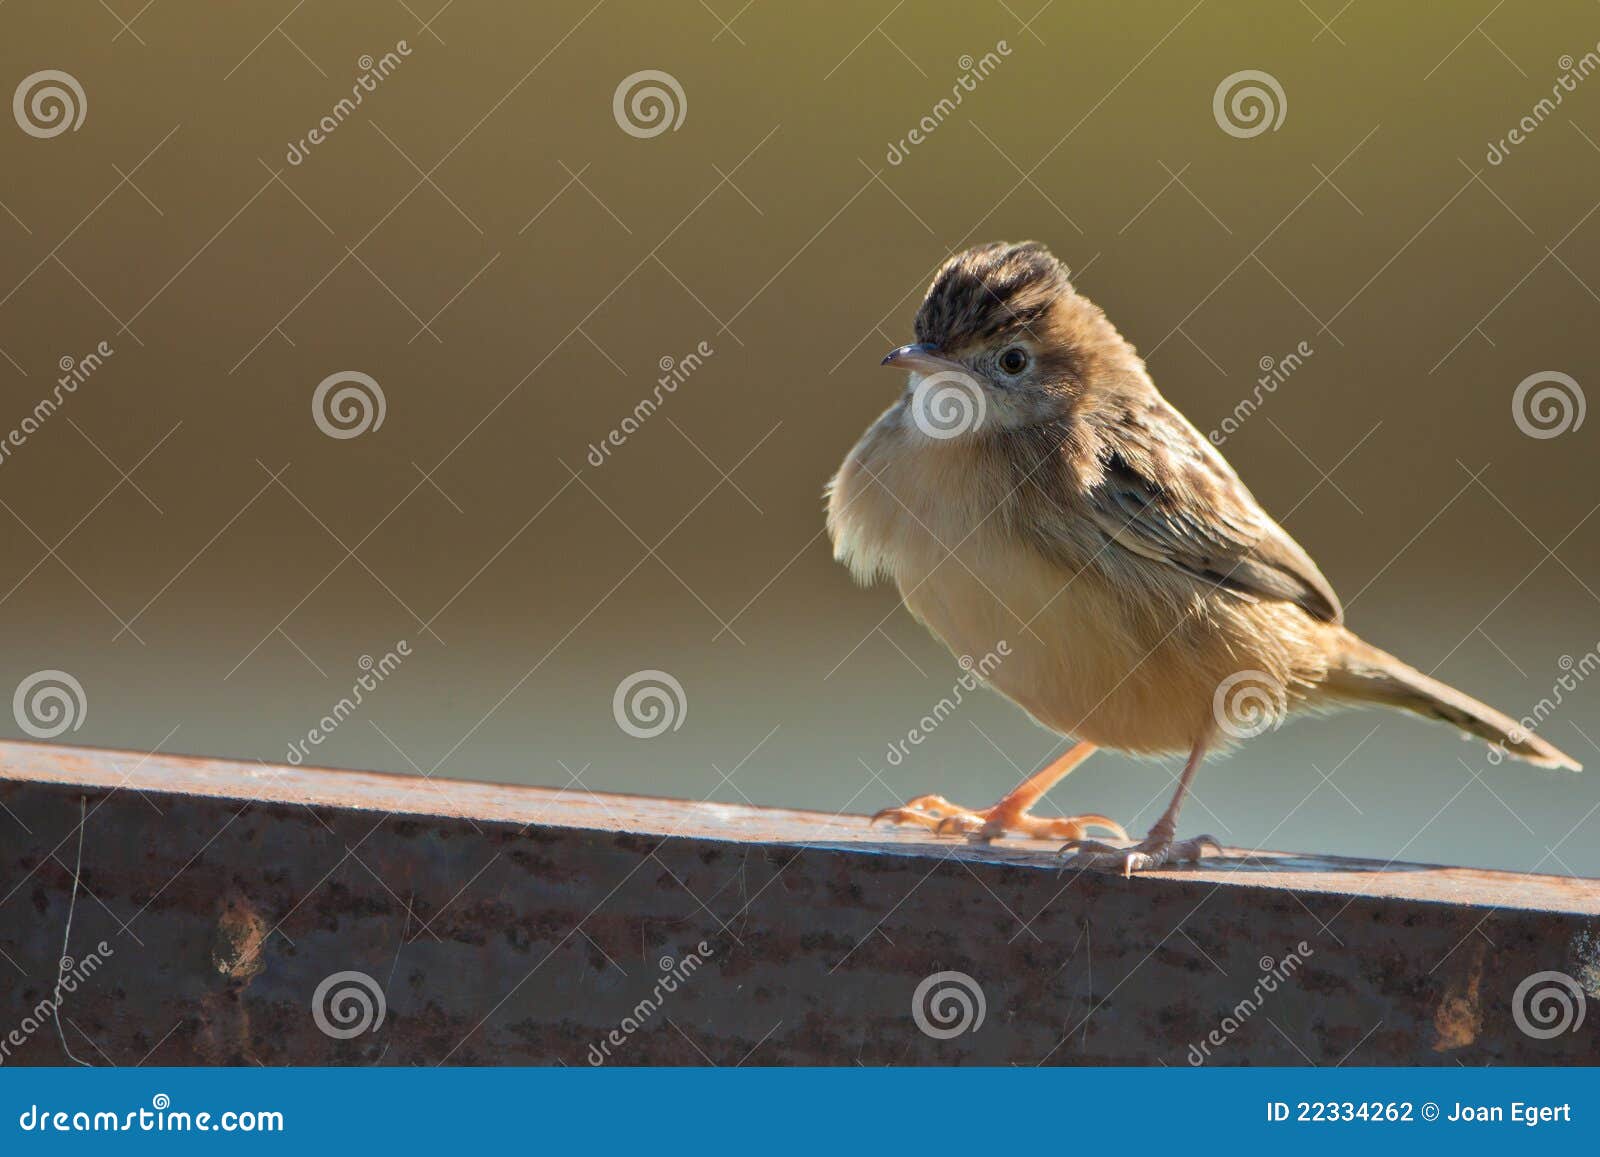 a streaked fan-tailed warbler on a fence